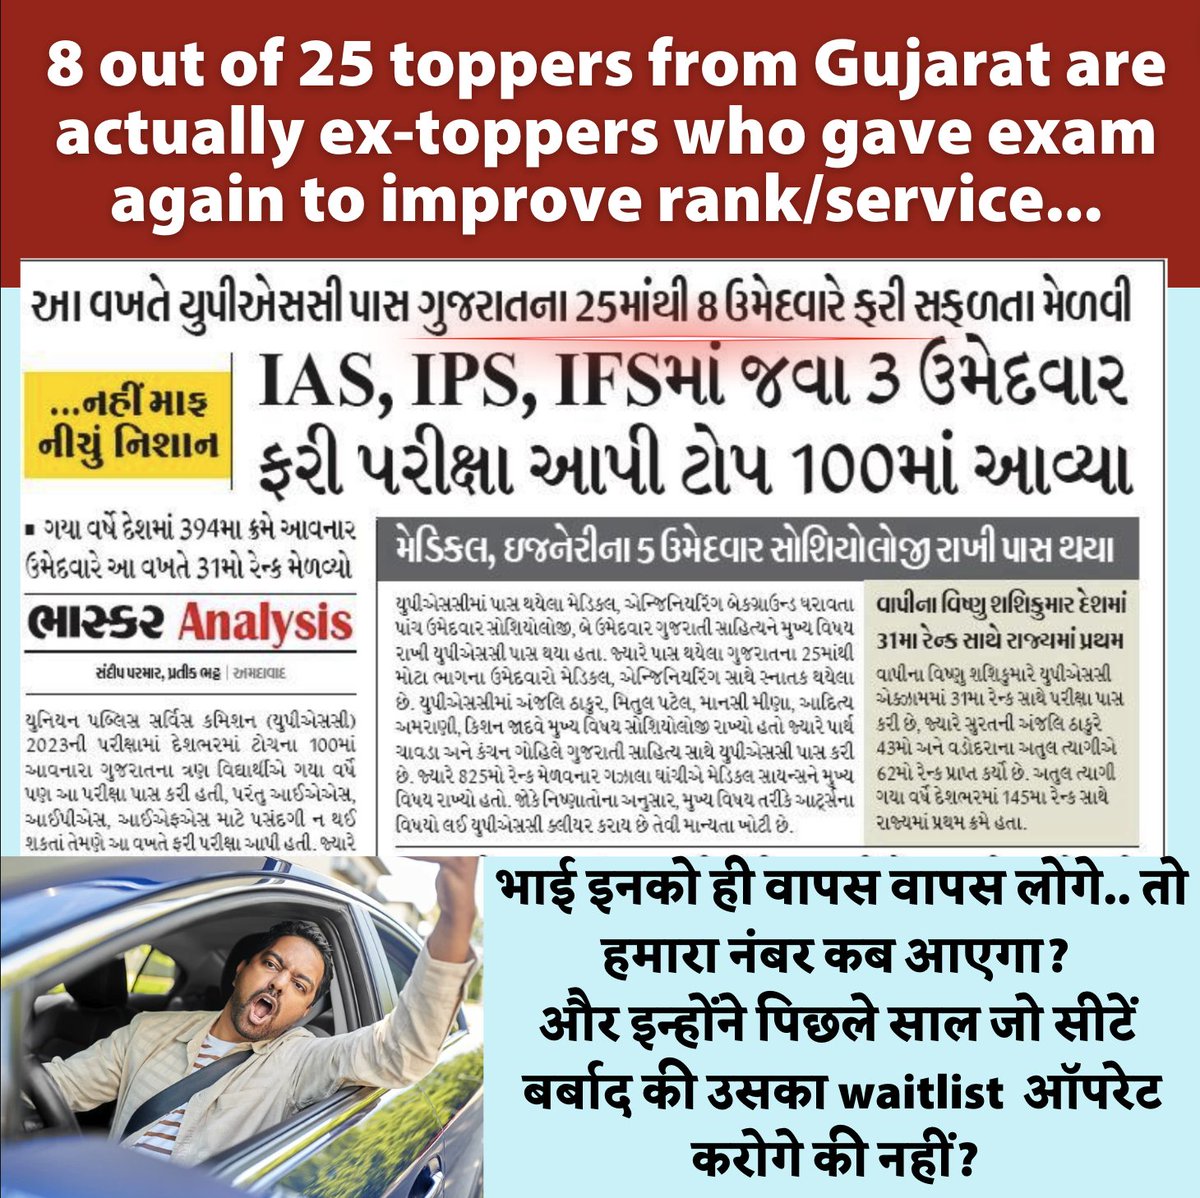 As per this article in Divyabhaskar, 8 out of 25 toppers from Gujarat had cleared the UPSC exam in the past (e.g. 2022), and again gave exam to improve their rank/service. 

Will UPSC fill the backlogs created by them in last cycle by updating waiting-list of CSE-2022? 

कई